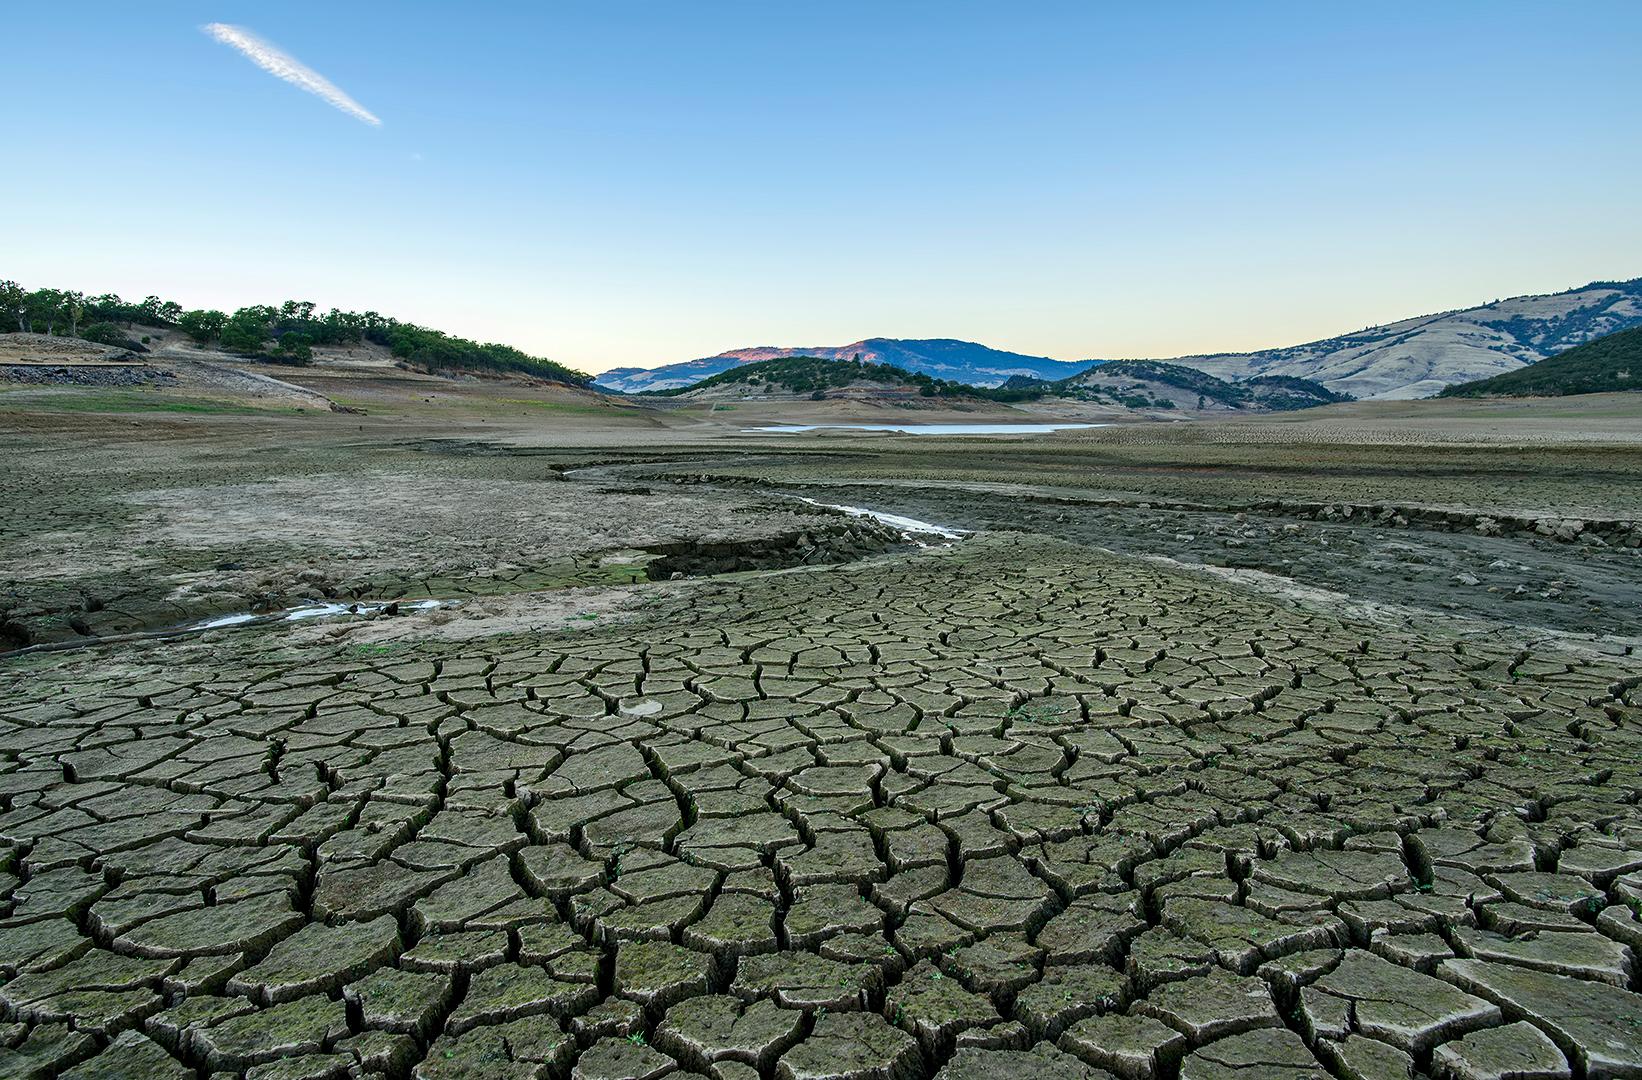 Oregon dry lakebedEmigrant Lake near Ashland, Oregon in October 2014. Current drought conditions have caused the lake to fall to less than 10 percent of its capacity.